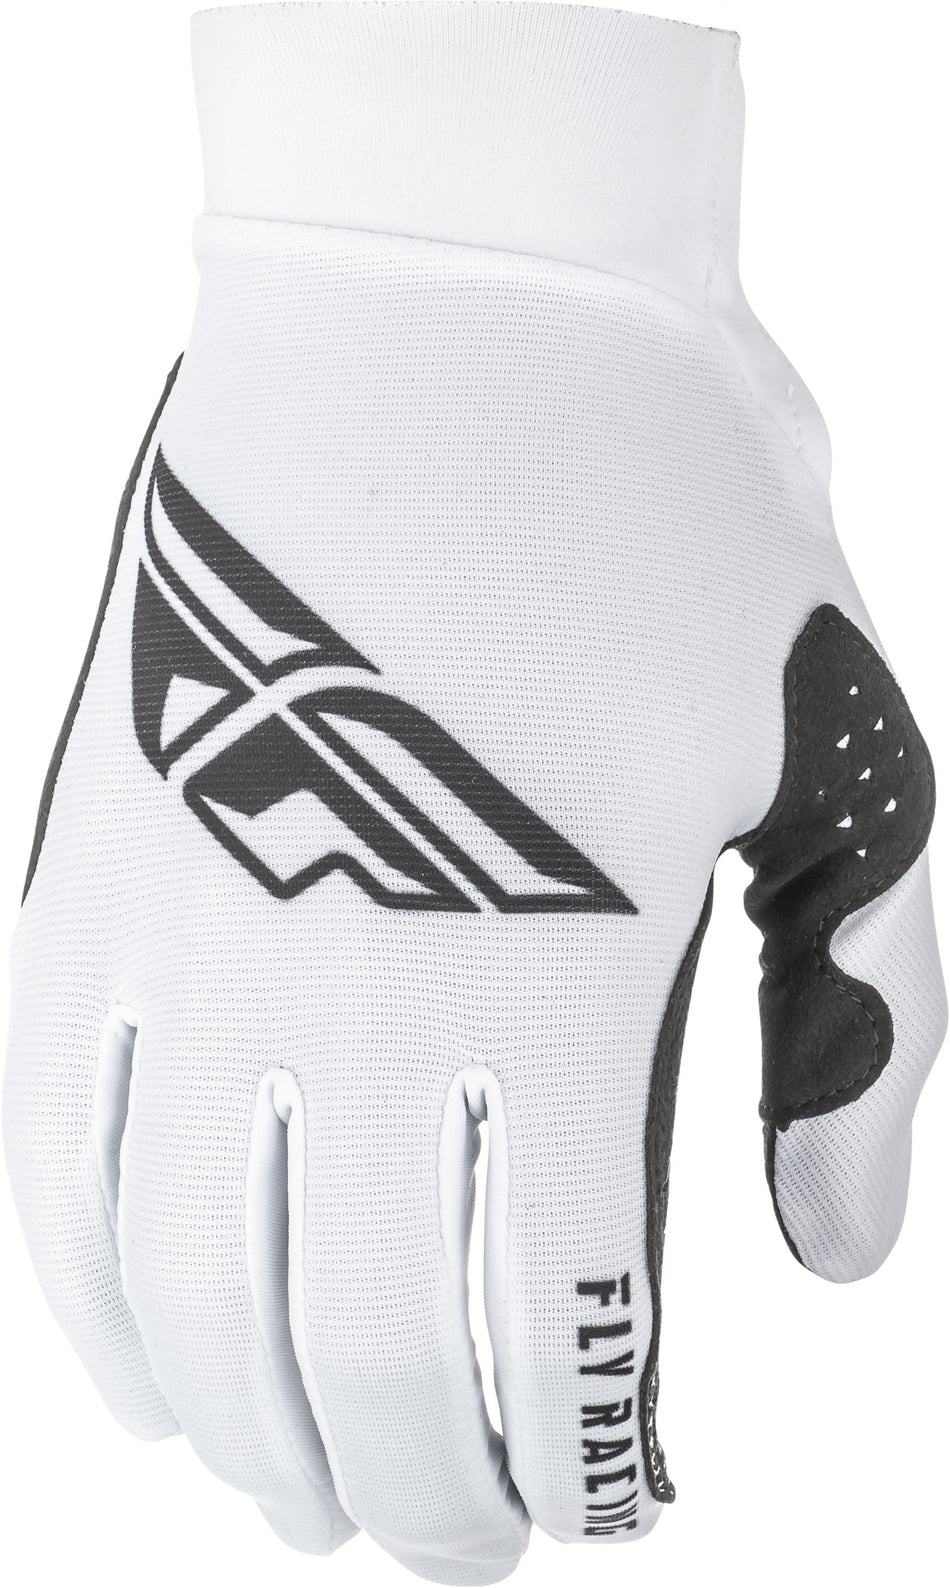 FLY RACING Pro Lite Gloves White Sz 08 372-81408